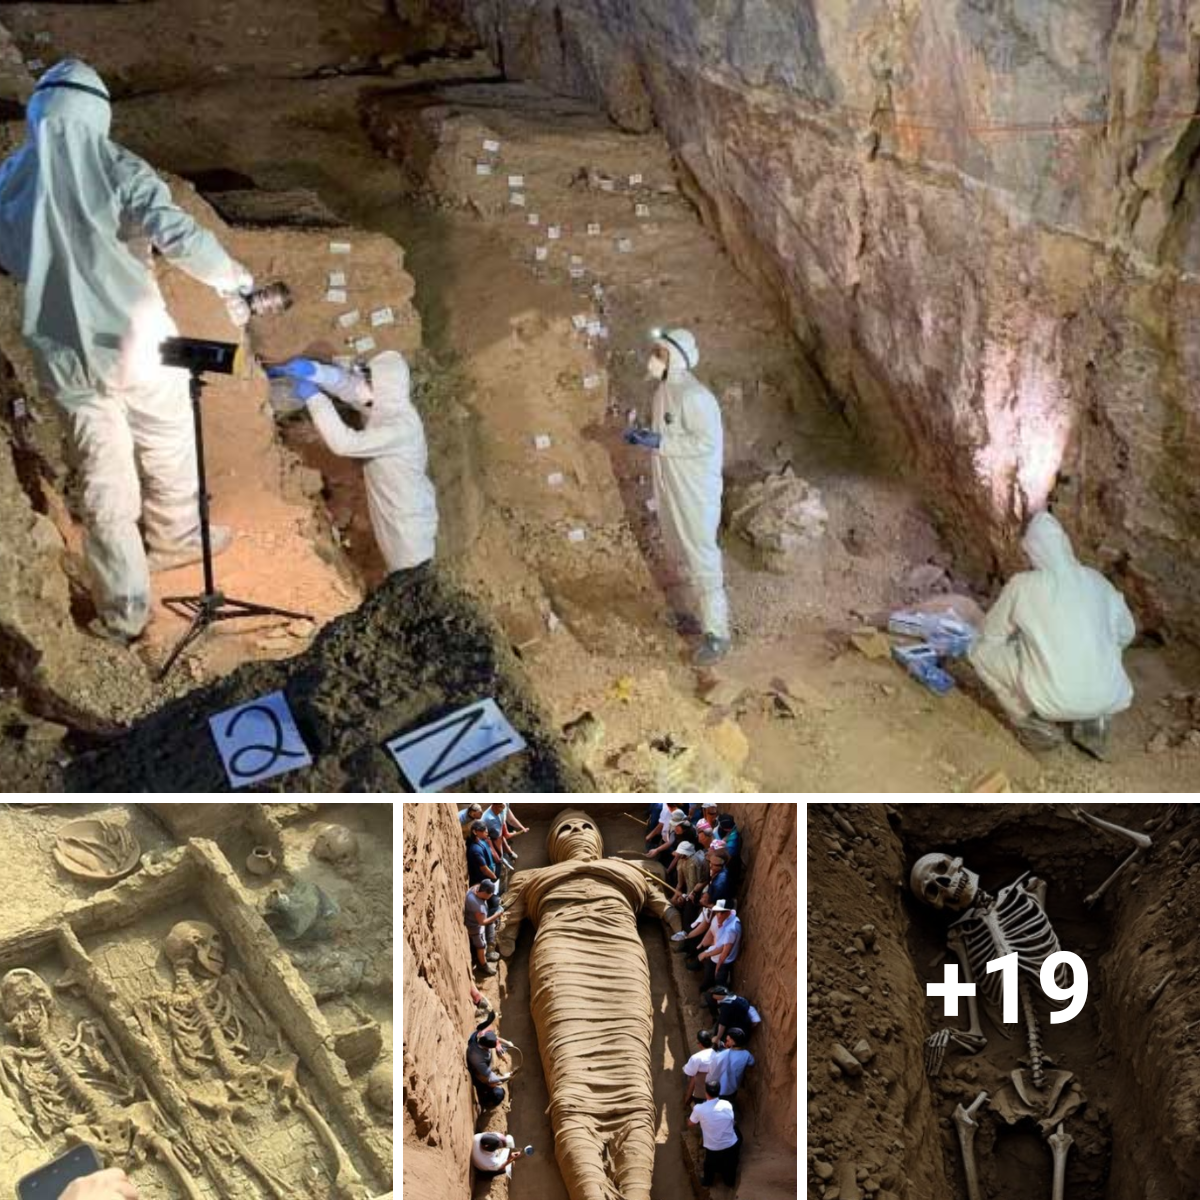 Shocking Discoveries Made by Archaeologists: “Tombs of Giants” Discovered in Crimea